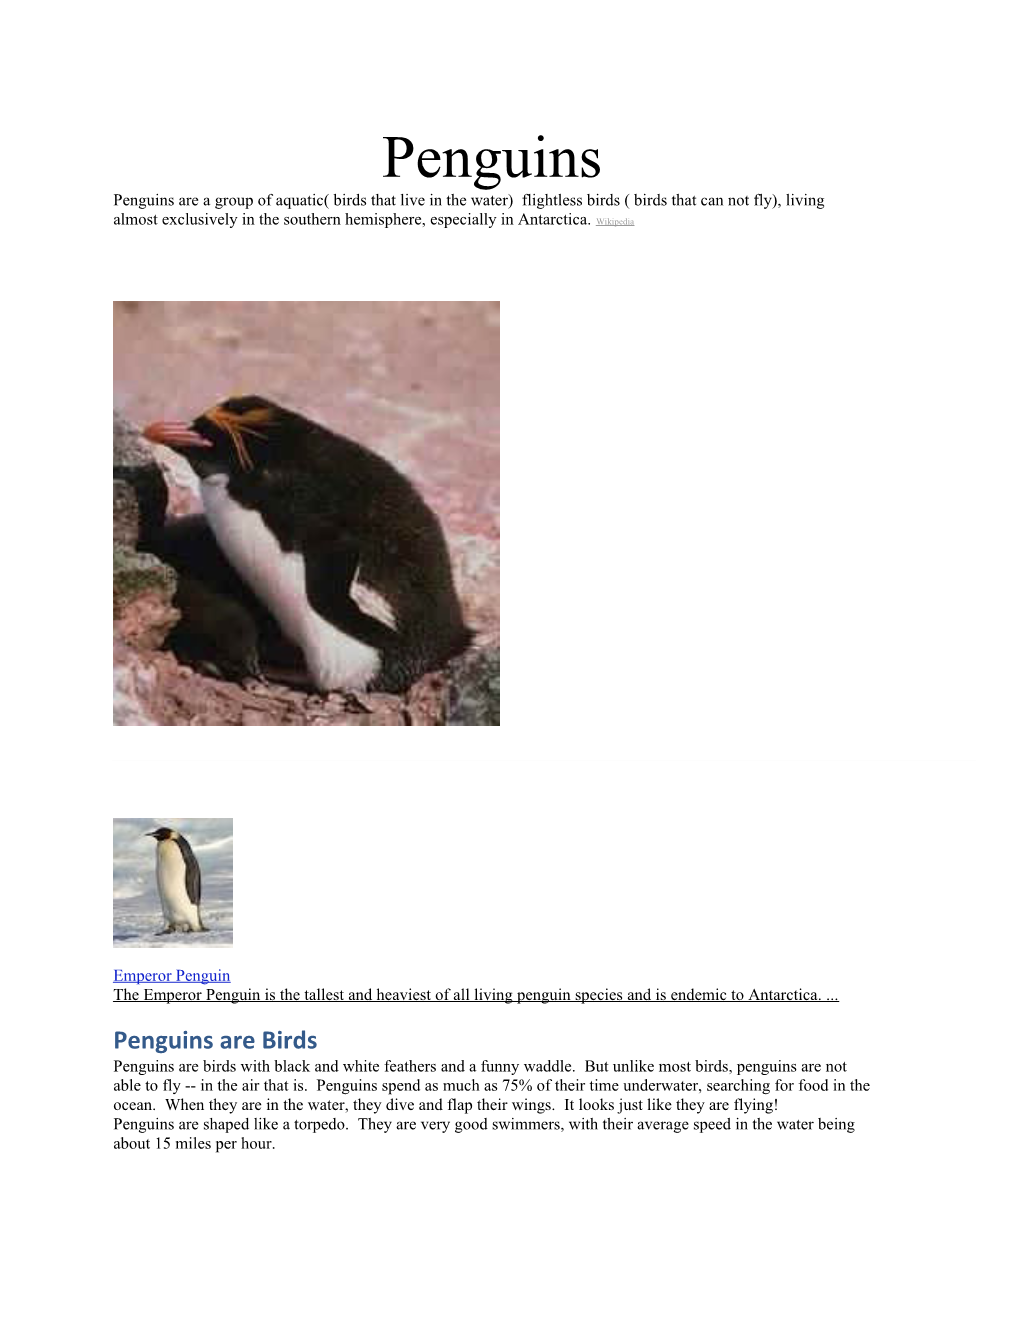 Penguins Are a Group of Aquatic( Birds That Live in the Water) Flightless Birds ( Birds